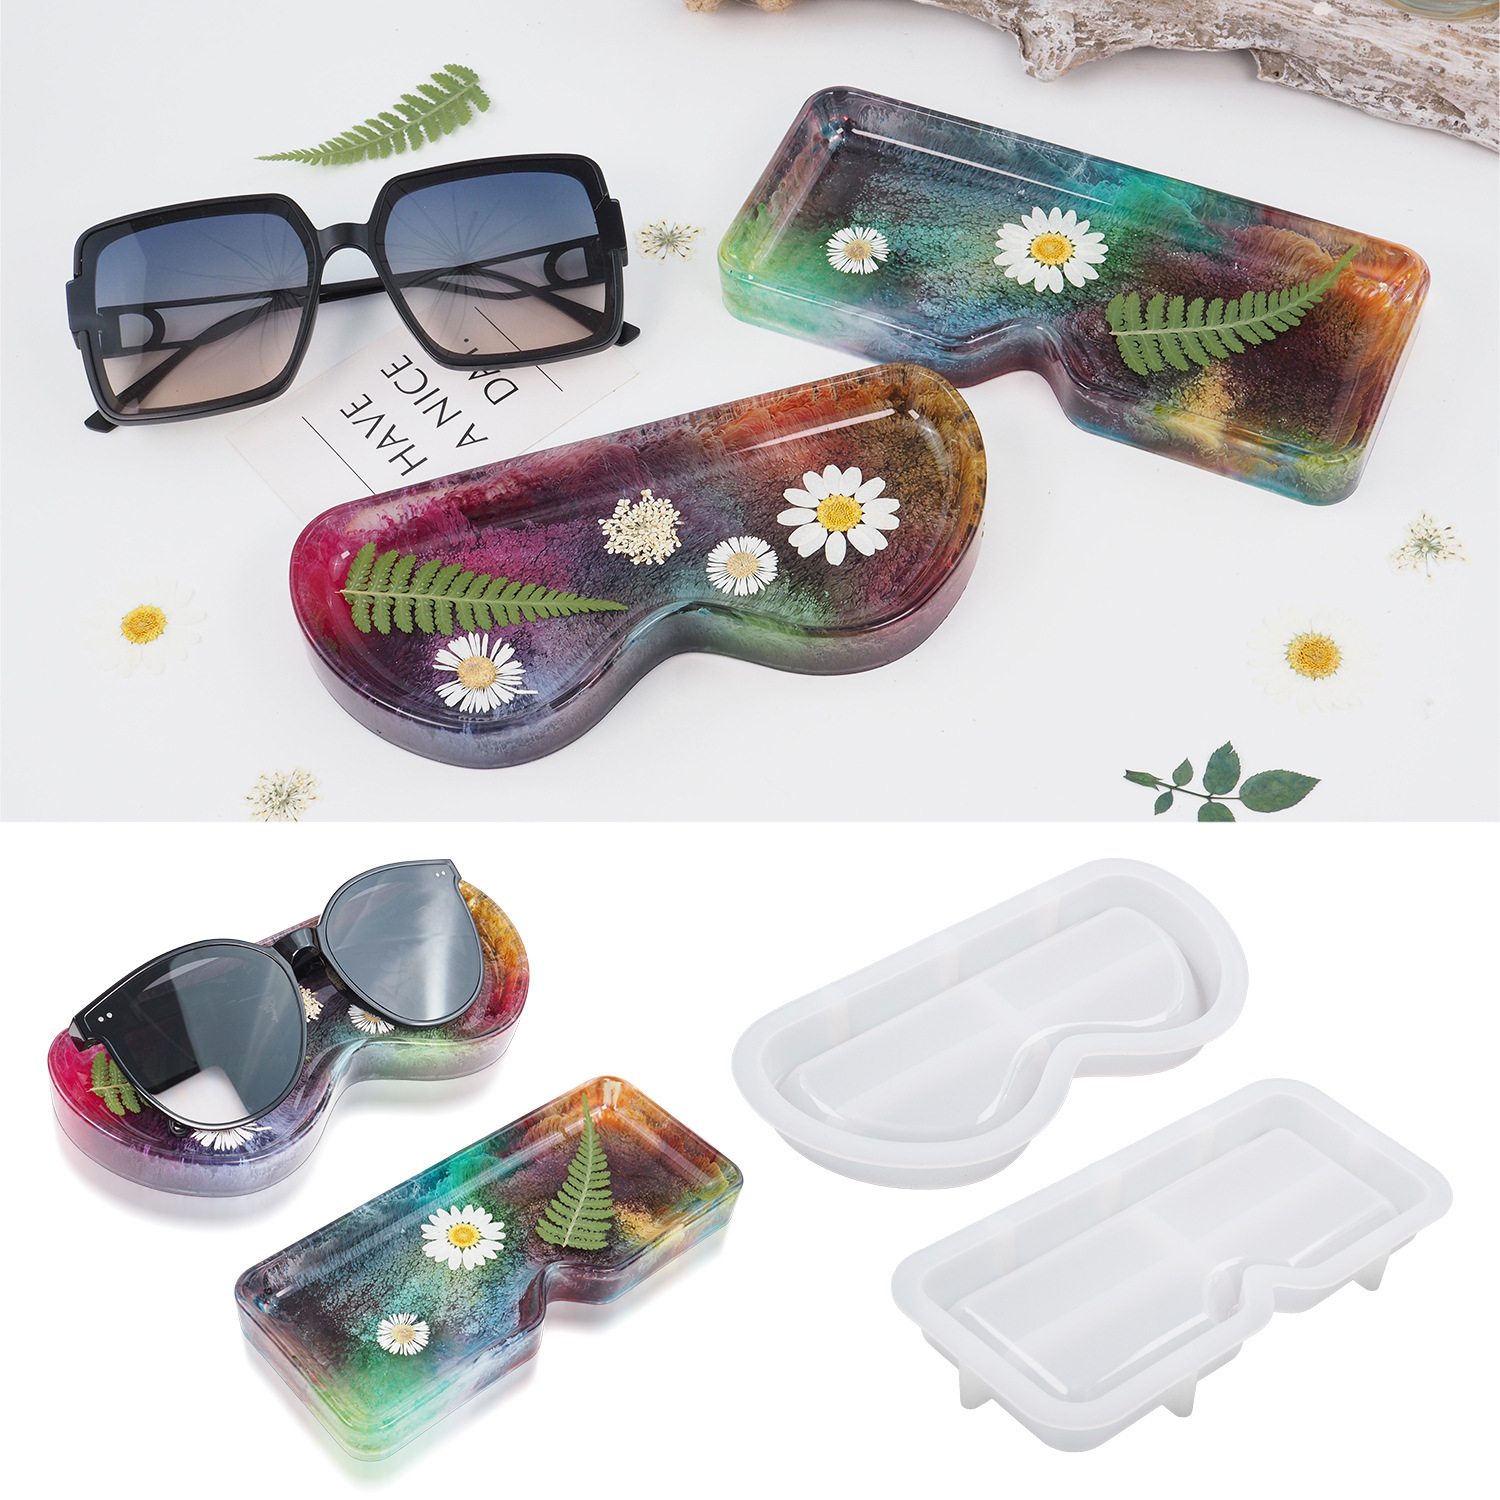 New 2Pcs Resin Molds for Glasses Tray,Silicone Molds for Resin Casting Sunglasses Holder Mold, Tray Mold for Myopia Glasses,Presbyopic Glasses